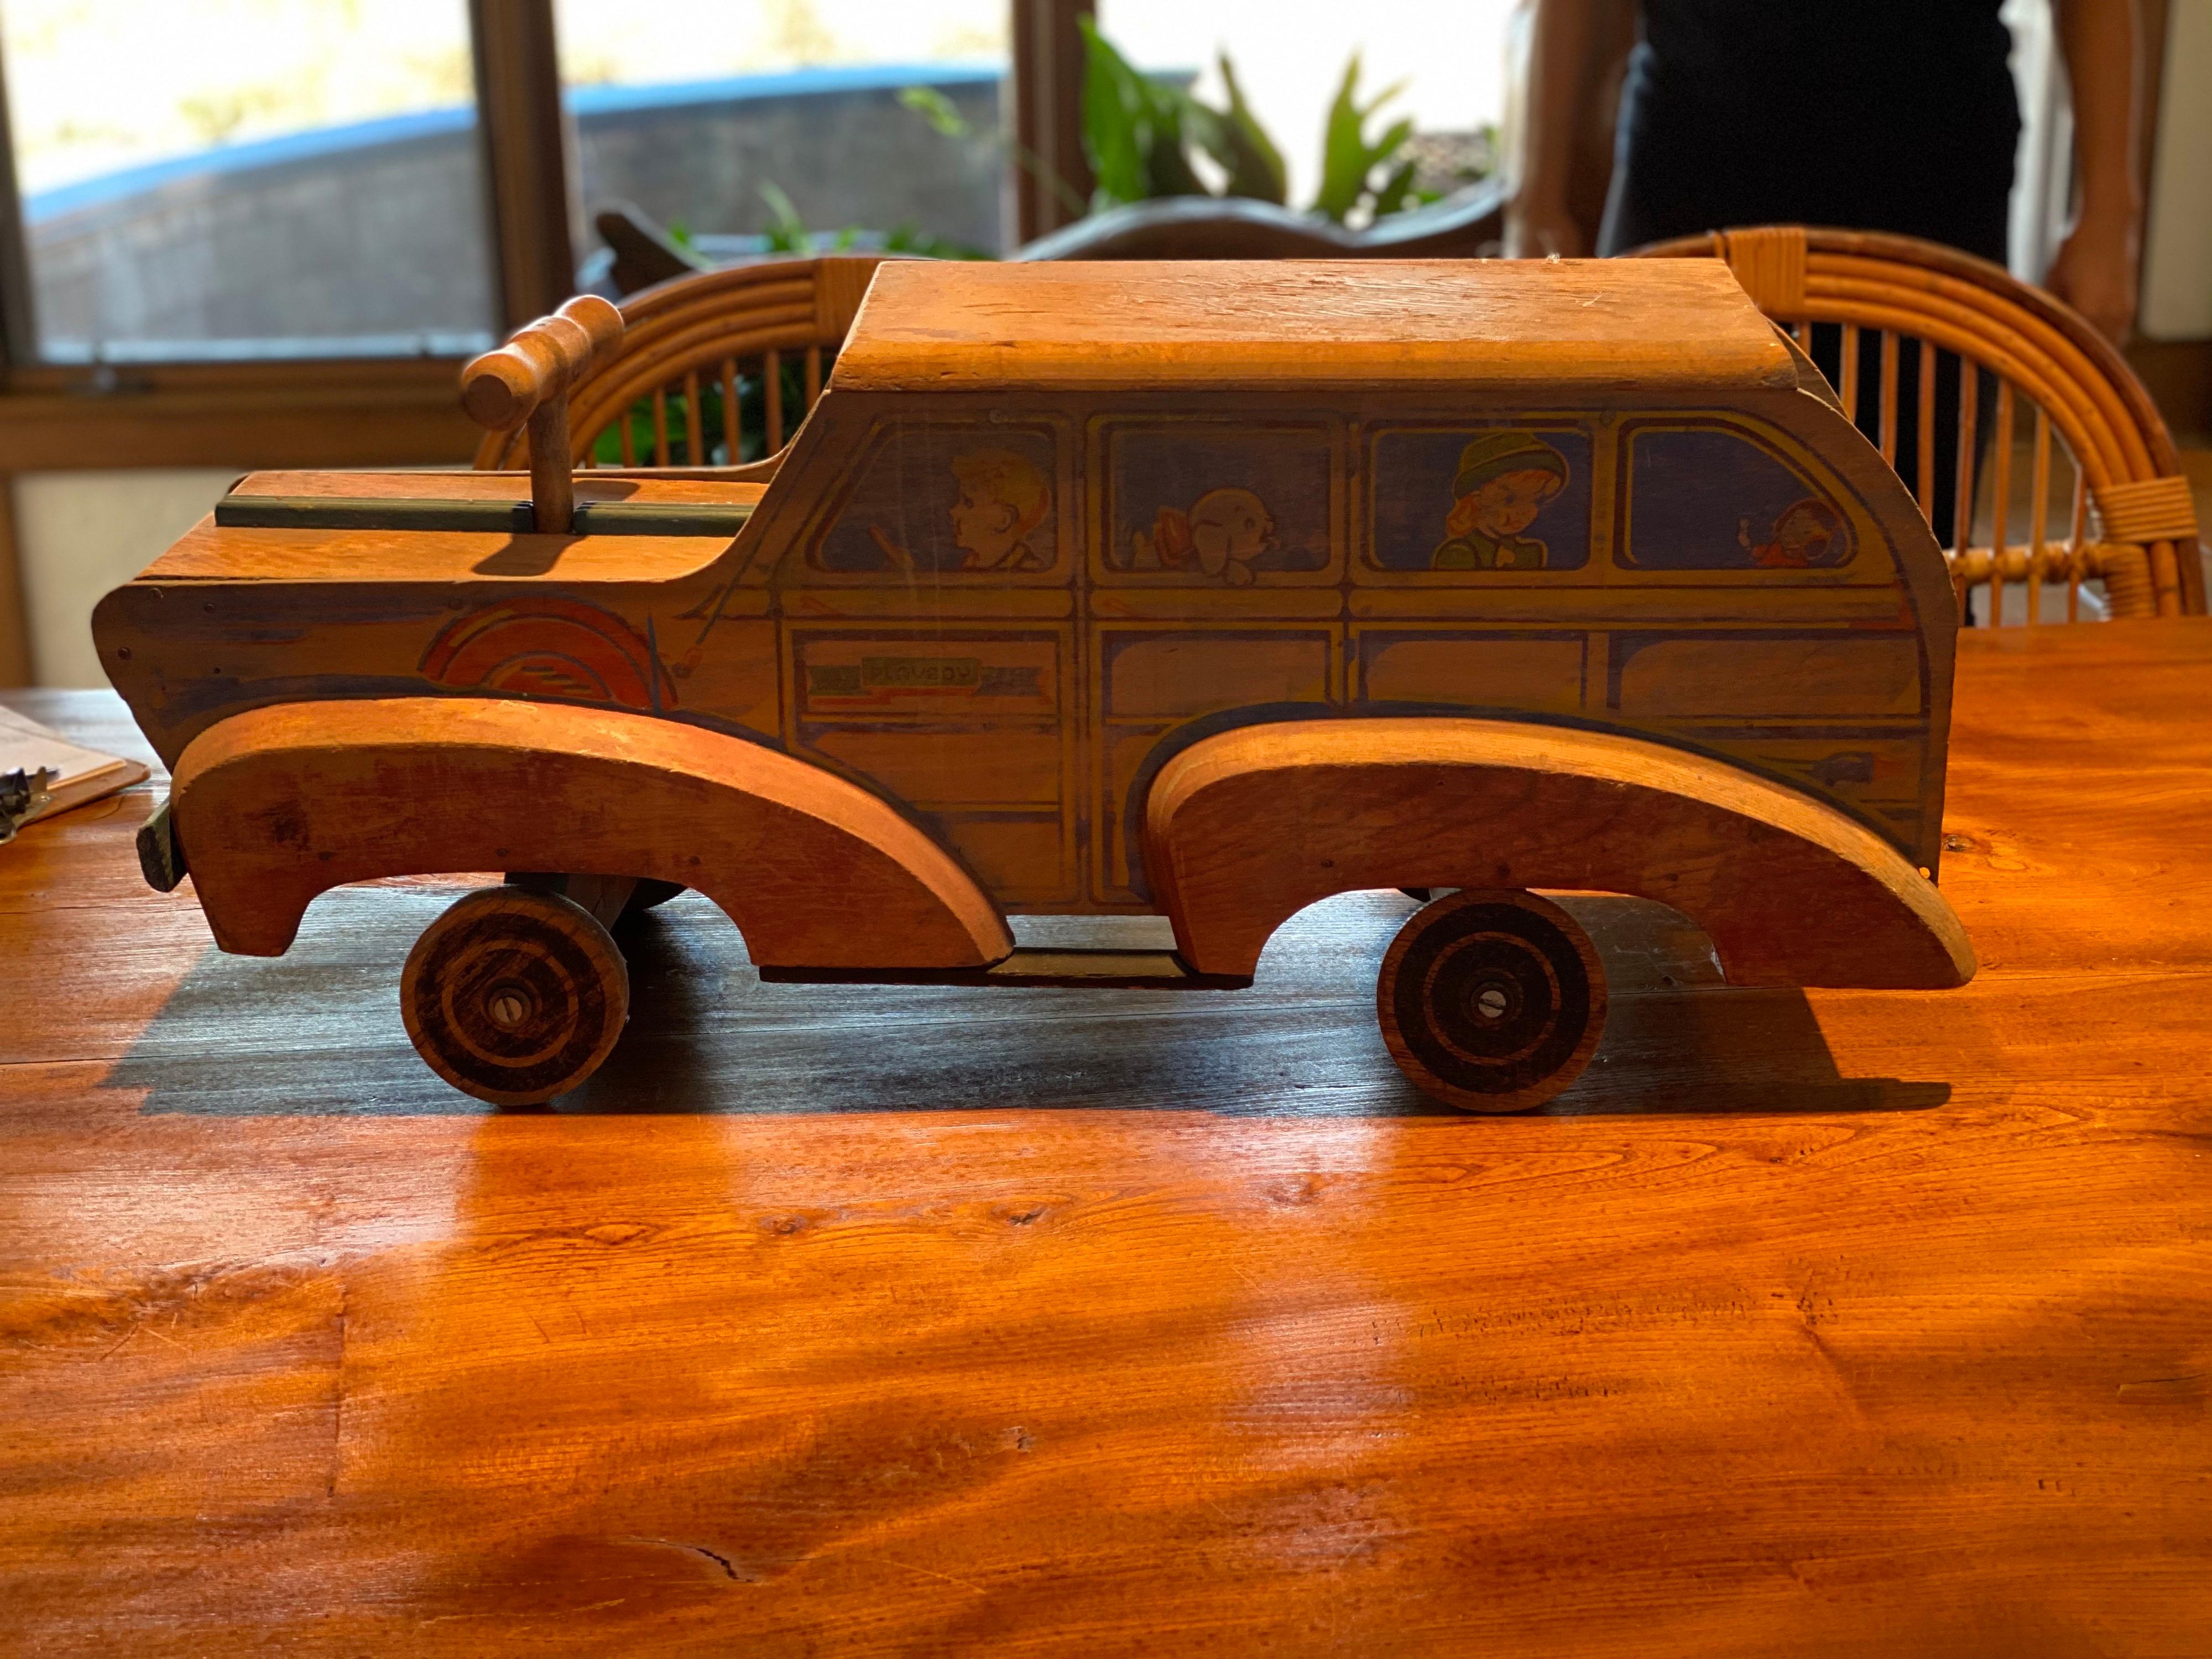 A painted and carved wood toy car,
circa 1930-1940
Modeled as beach wagon, stencil-decorated with
children. Sit on and ride toy.
Measures: 13 1/2 in. high, 31 1/2 in. length, 12 in. deep
Sun fading and surface wear throughout.